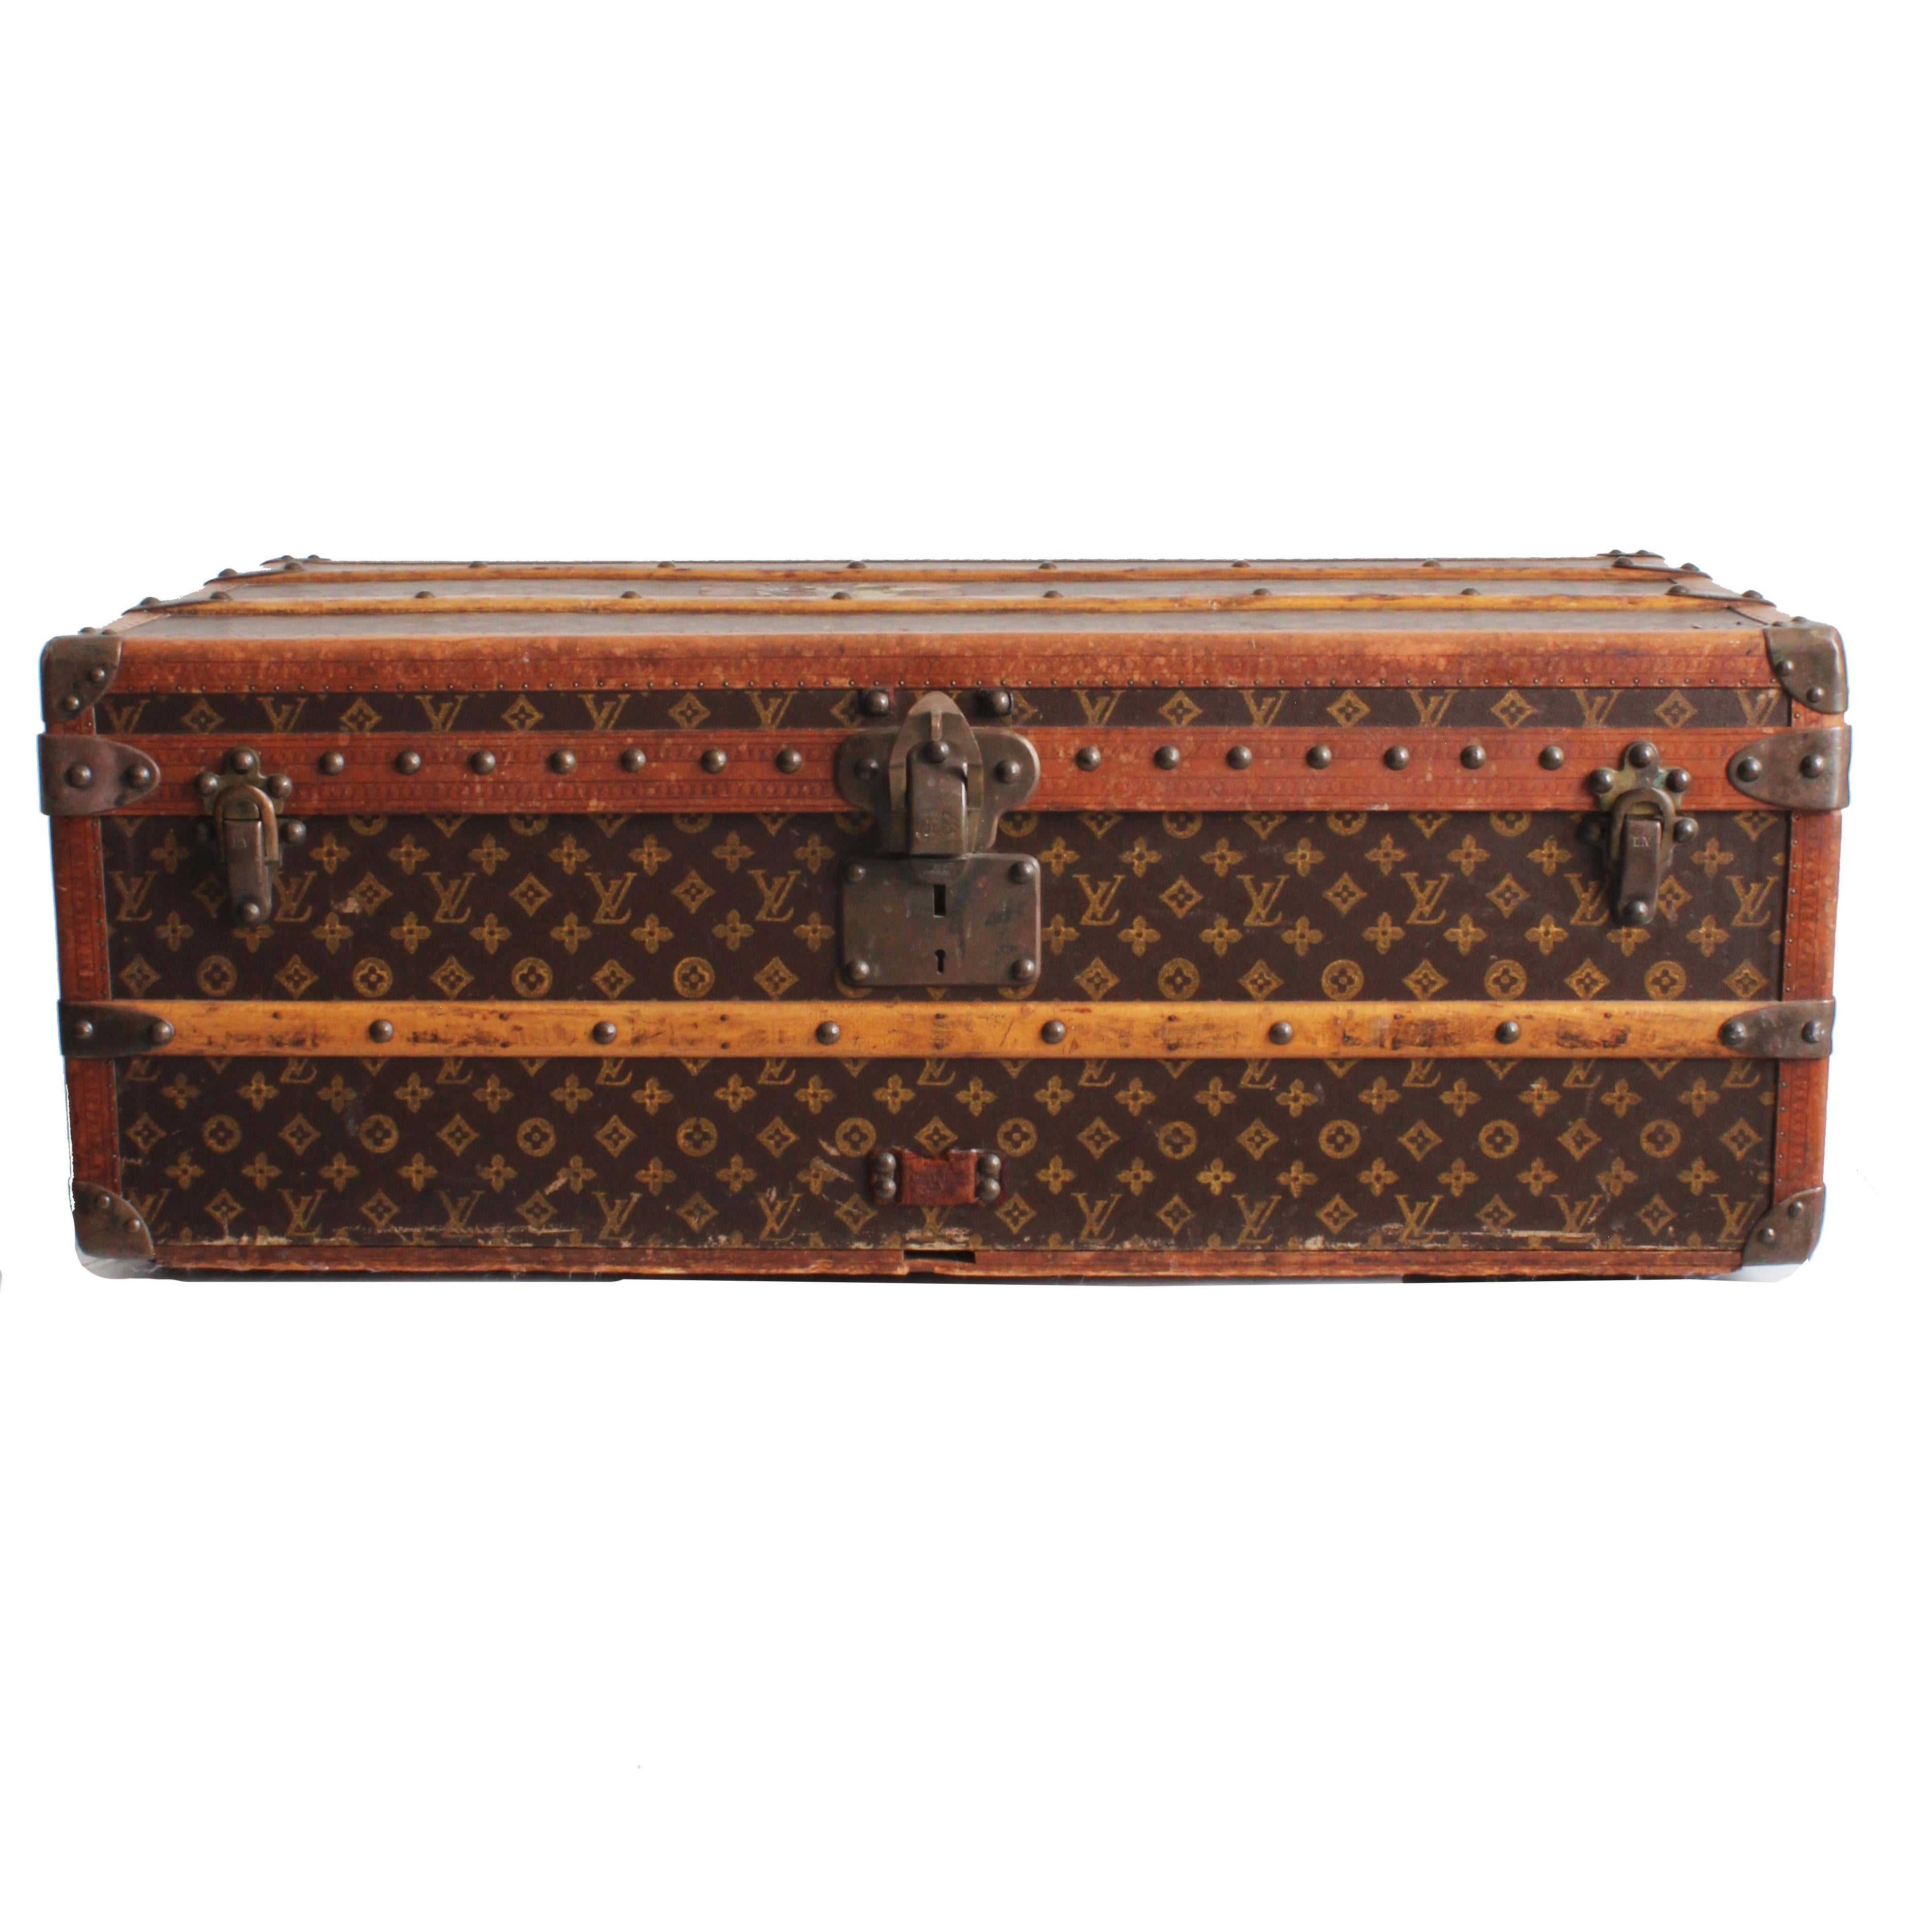 Vintage Louis Vuitton Cabin Trunk with Insert, circa 1961.  Made from monogram canvas, leather LV stamped trim; lined in fabric; wheels on bottom.  A great example of Louis Vuitton's craftsmanship & while designed for travel, makes a fabulous piece